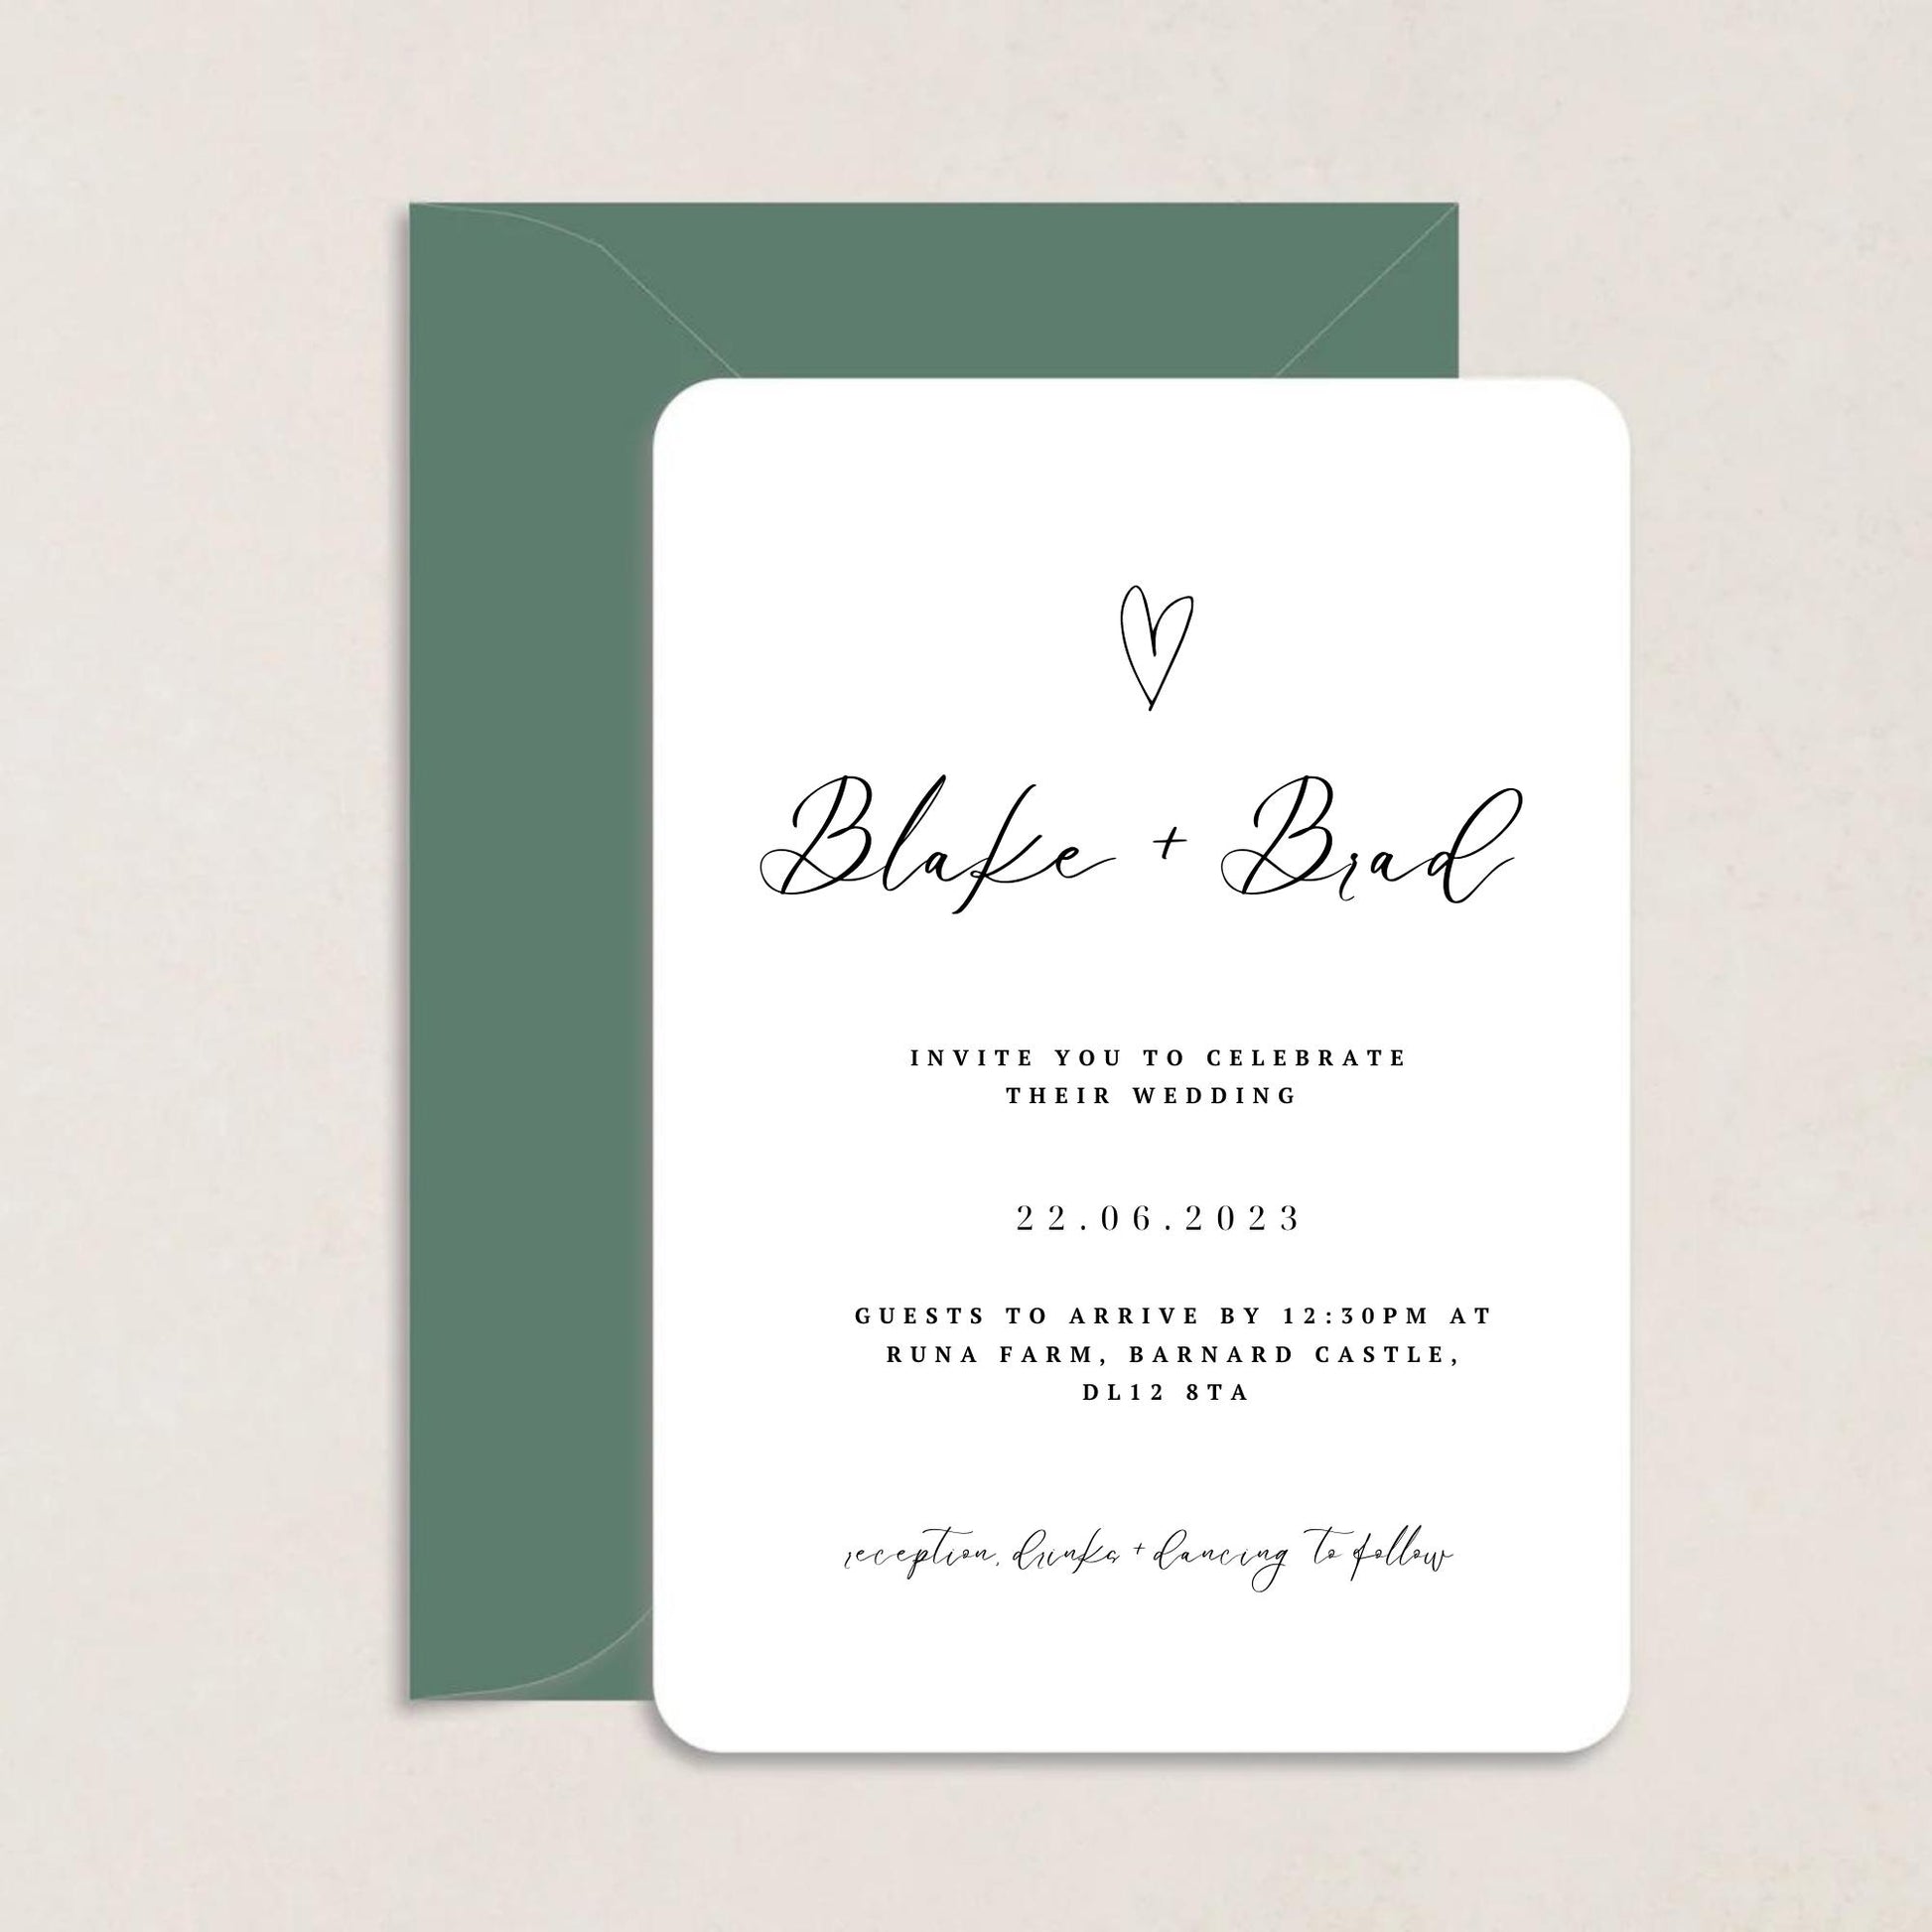 BLAKE Wedding Invitations - Wedding Invitations available at The Ivy Collection | Luxury Wedding Stationery